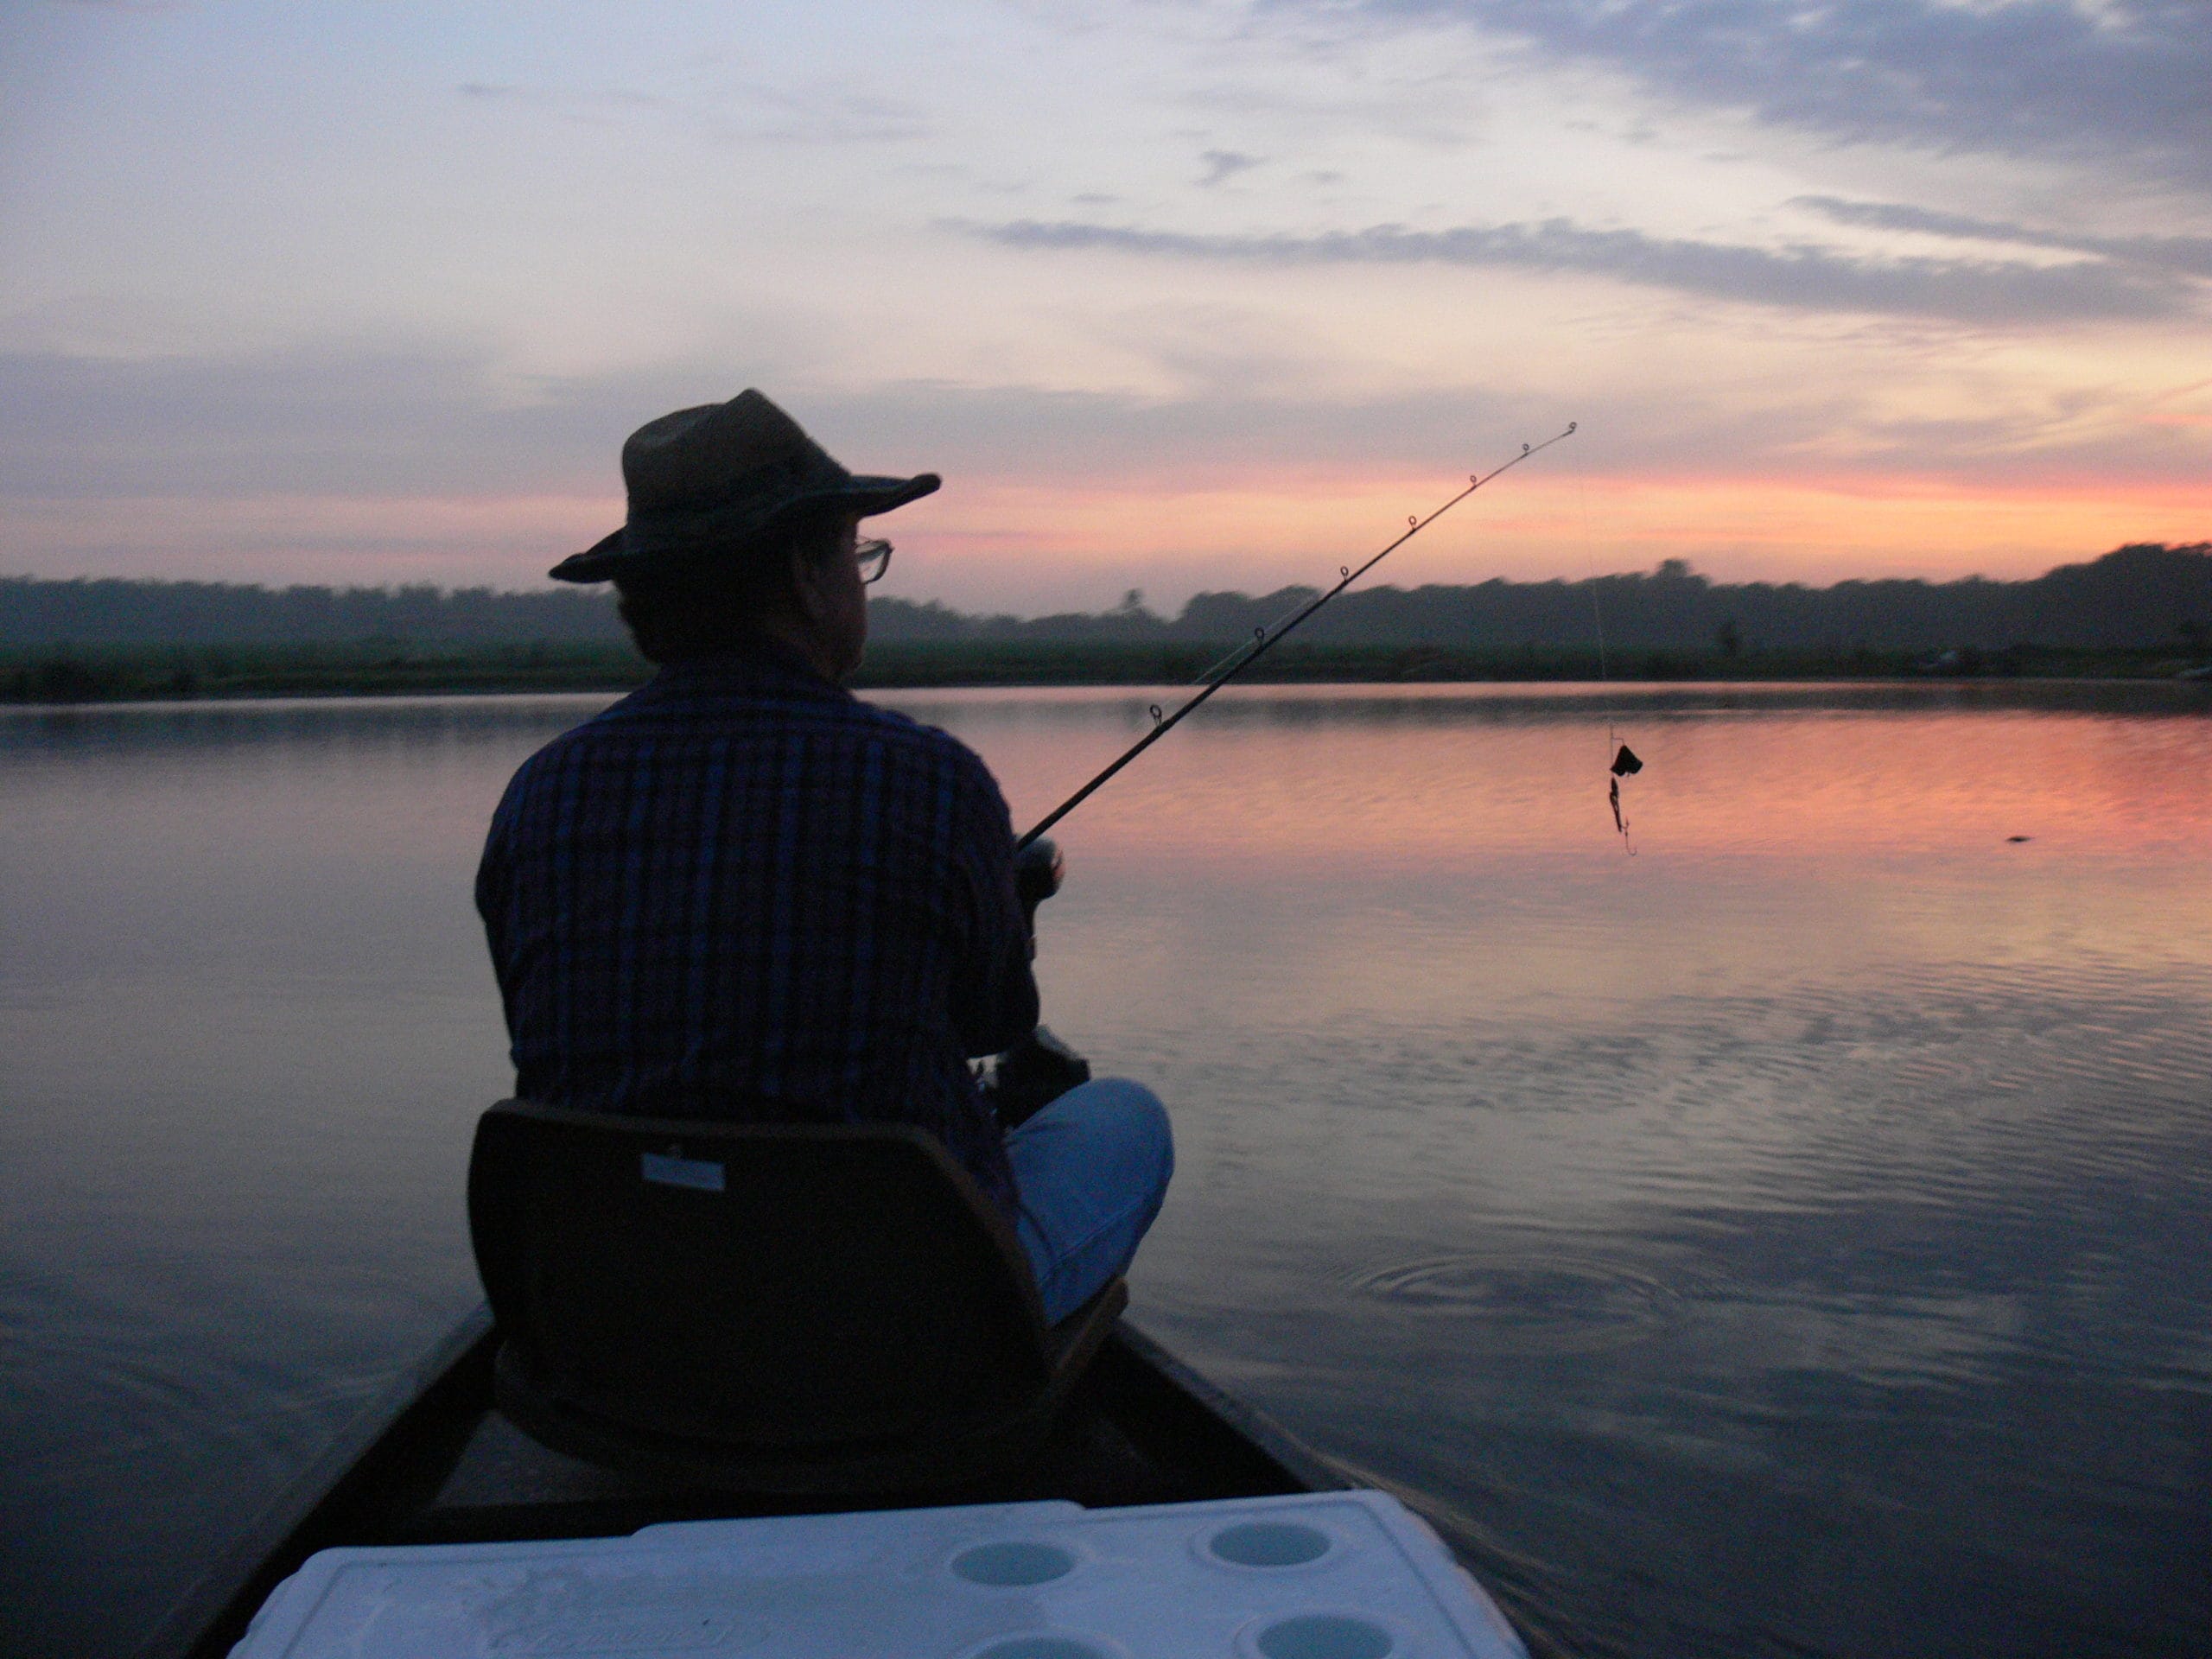 Those fortunate enough to share a fishing trip with legendary big-bass angler Pat Cullen couldn’t help but feel the anticipation as the sun began to set.